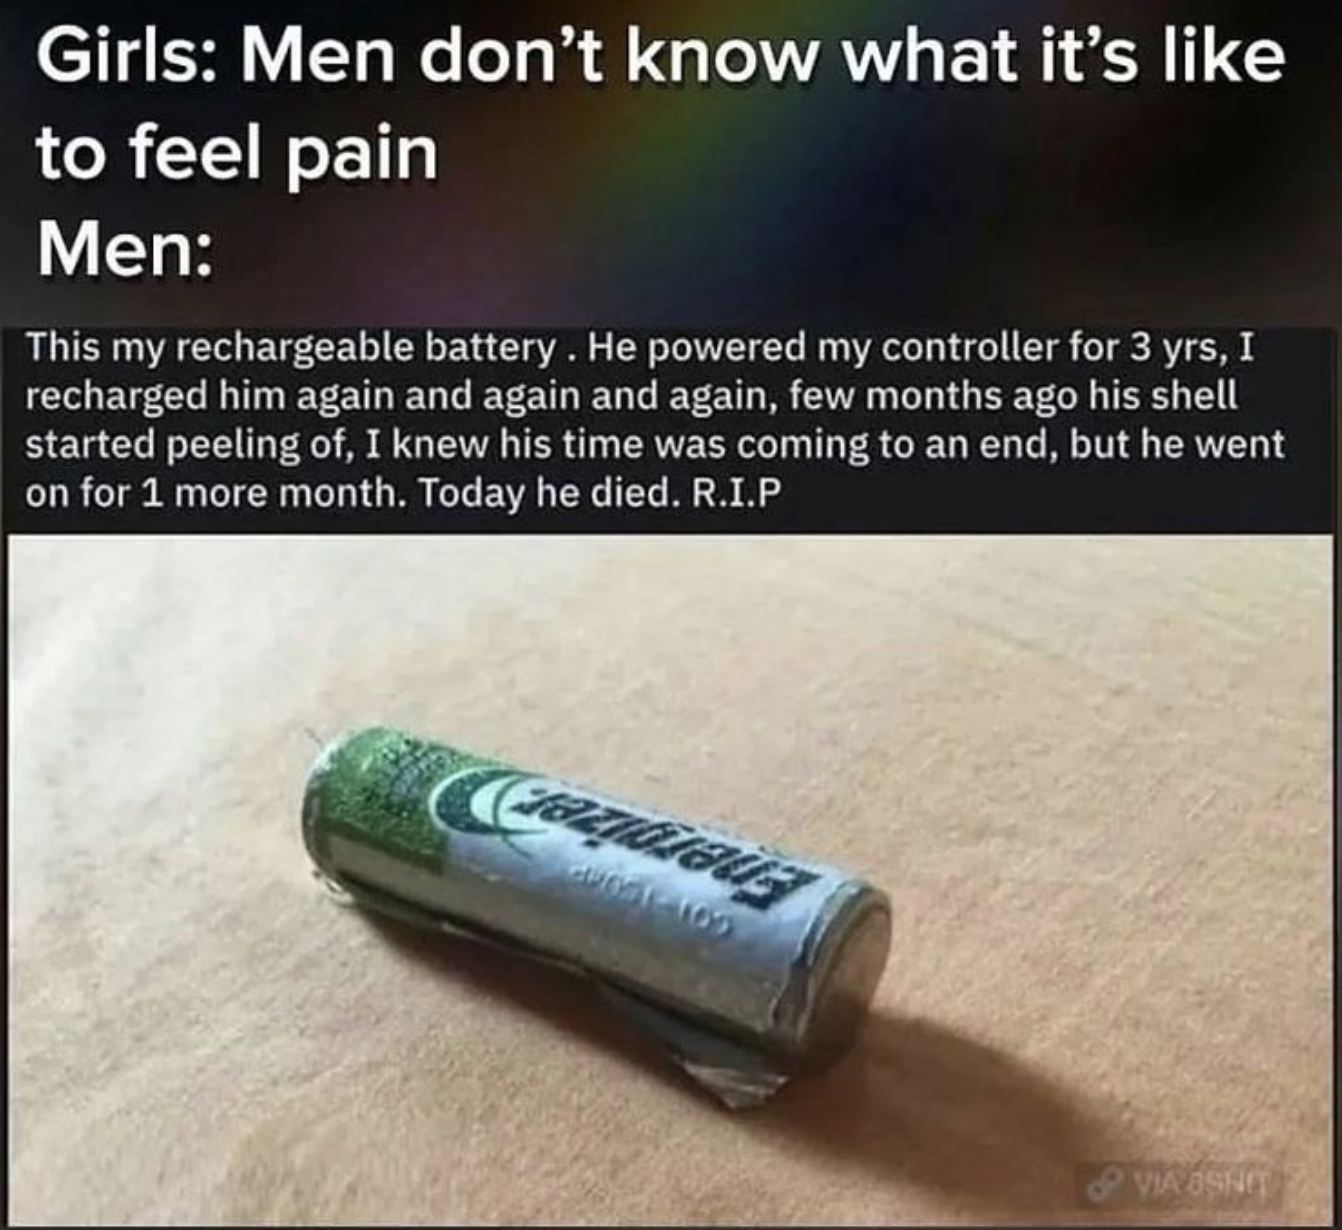 funny gaming memes - glee just the way you - Girls Men don't know what it's to feel pain Men This my rechargeable battery. He powered my controller for 3 yrs, I recharged him again and again and again, few months ago his shell started peeling of, I knew h